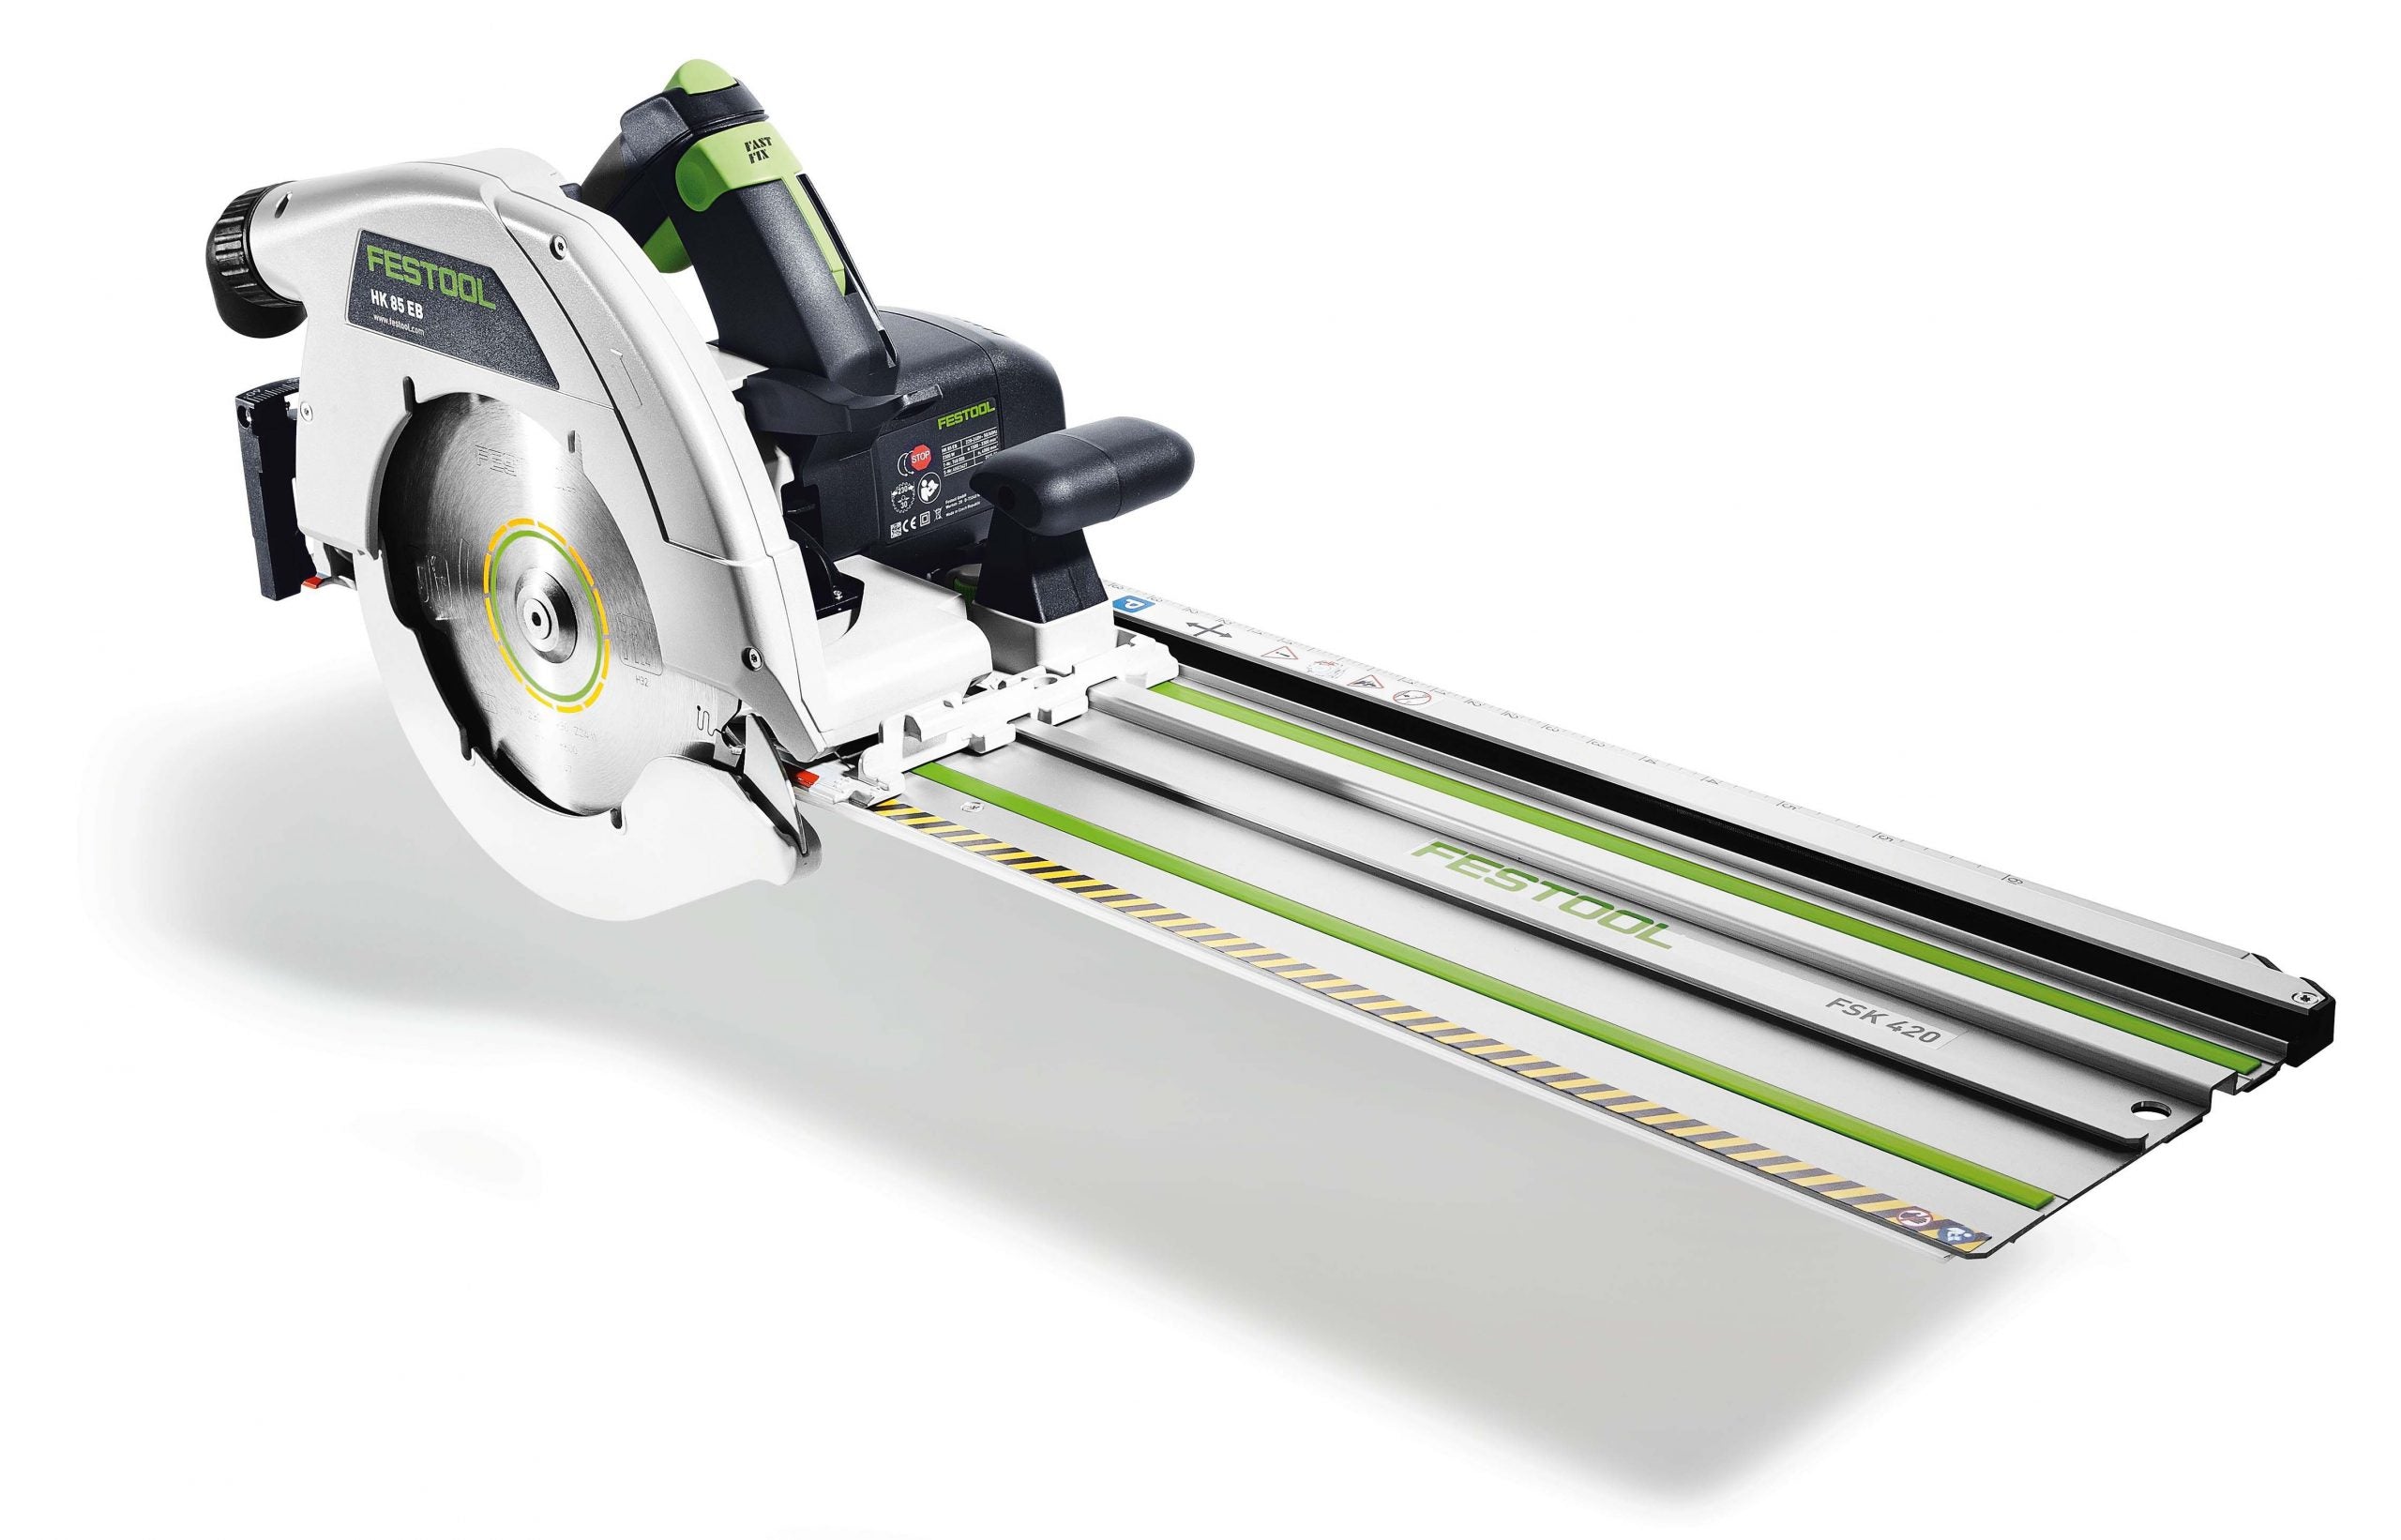 HK 85 230mm Circular Saw in Systainer with 1400mm Rail 576139 by Festool